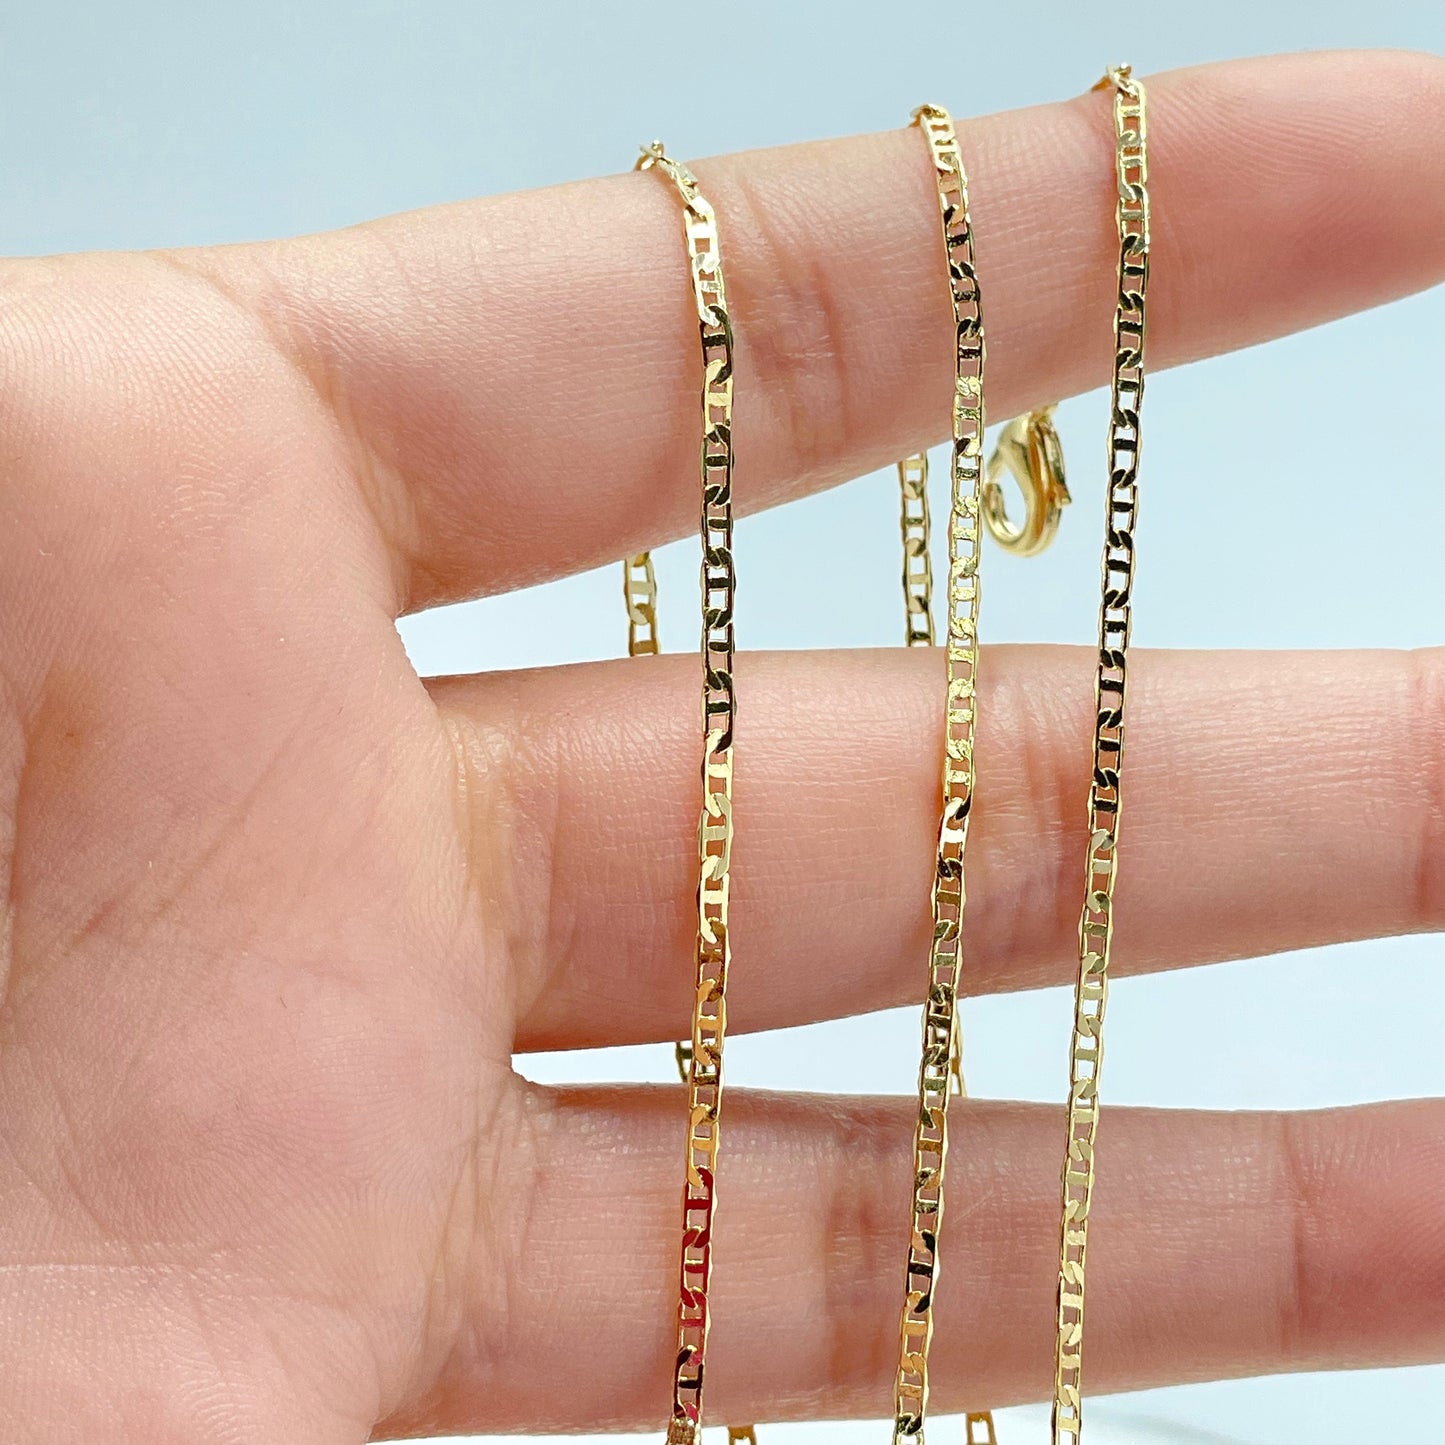 18k Gold Filled 1.5mm Thickness Mariner Anchor Link Chain  18 inches Necklaces for Wholesale Jewelry Making Supplies